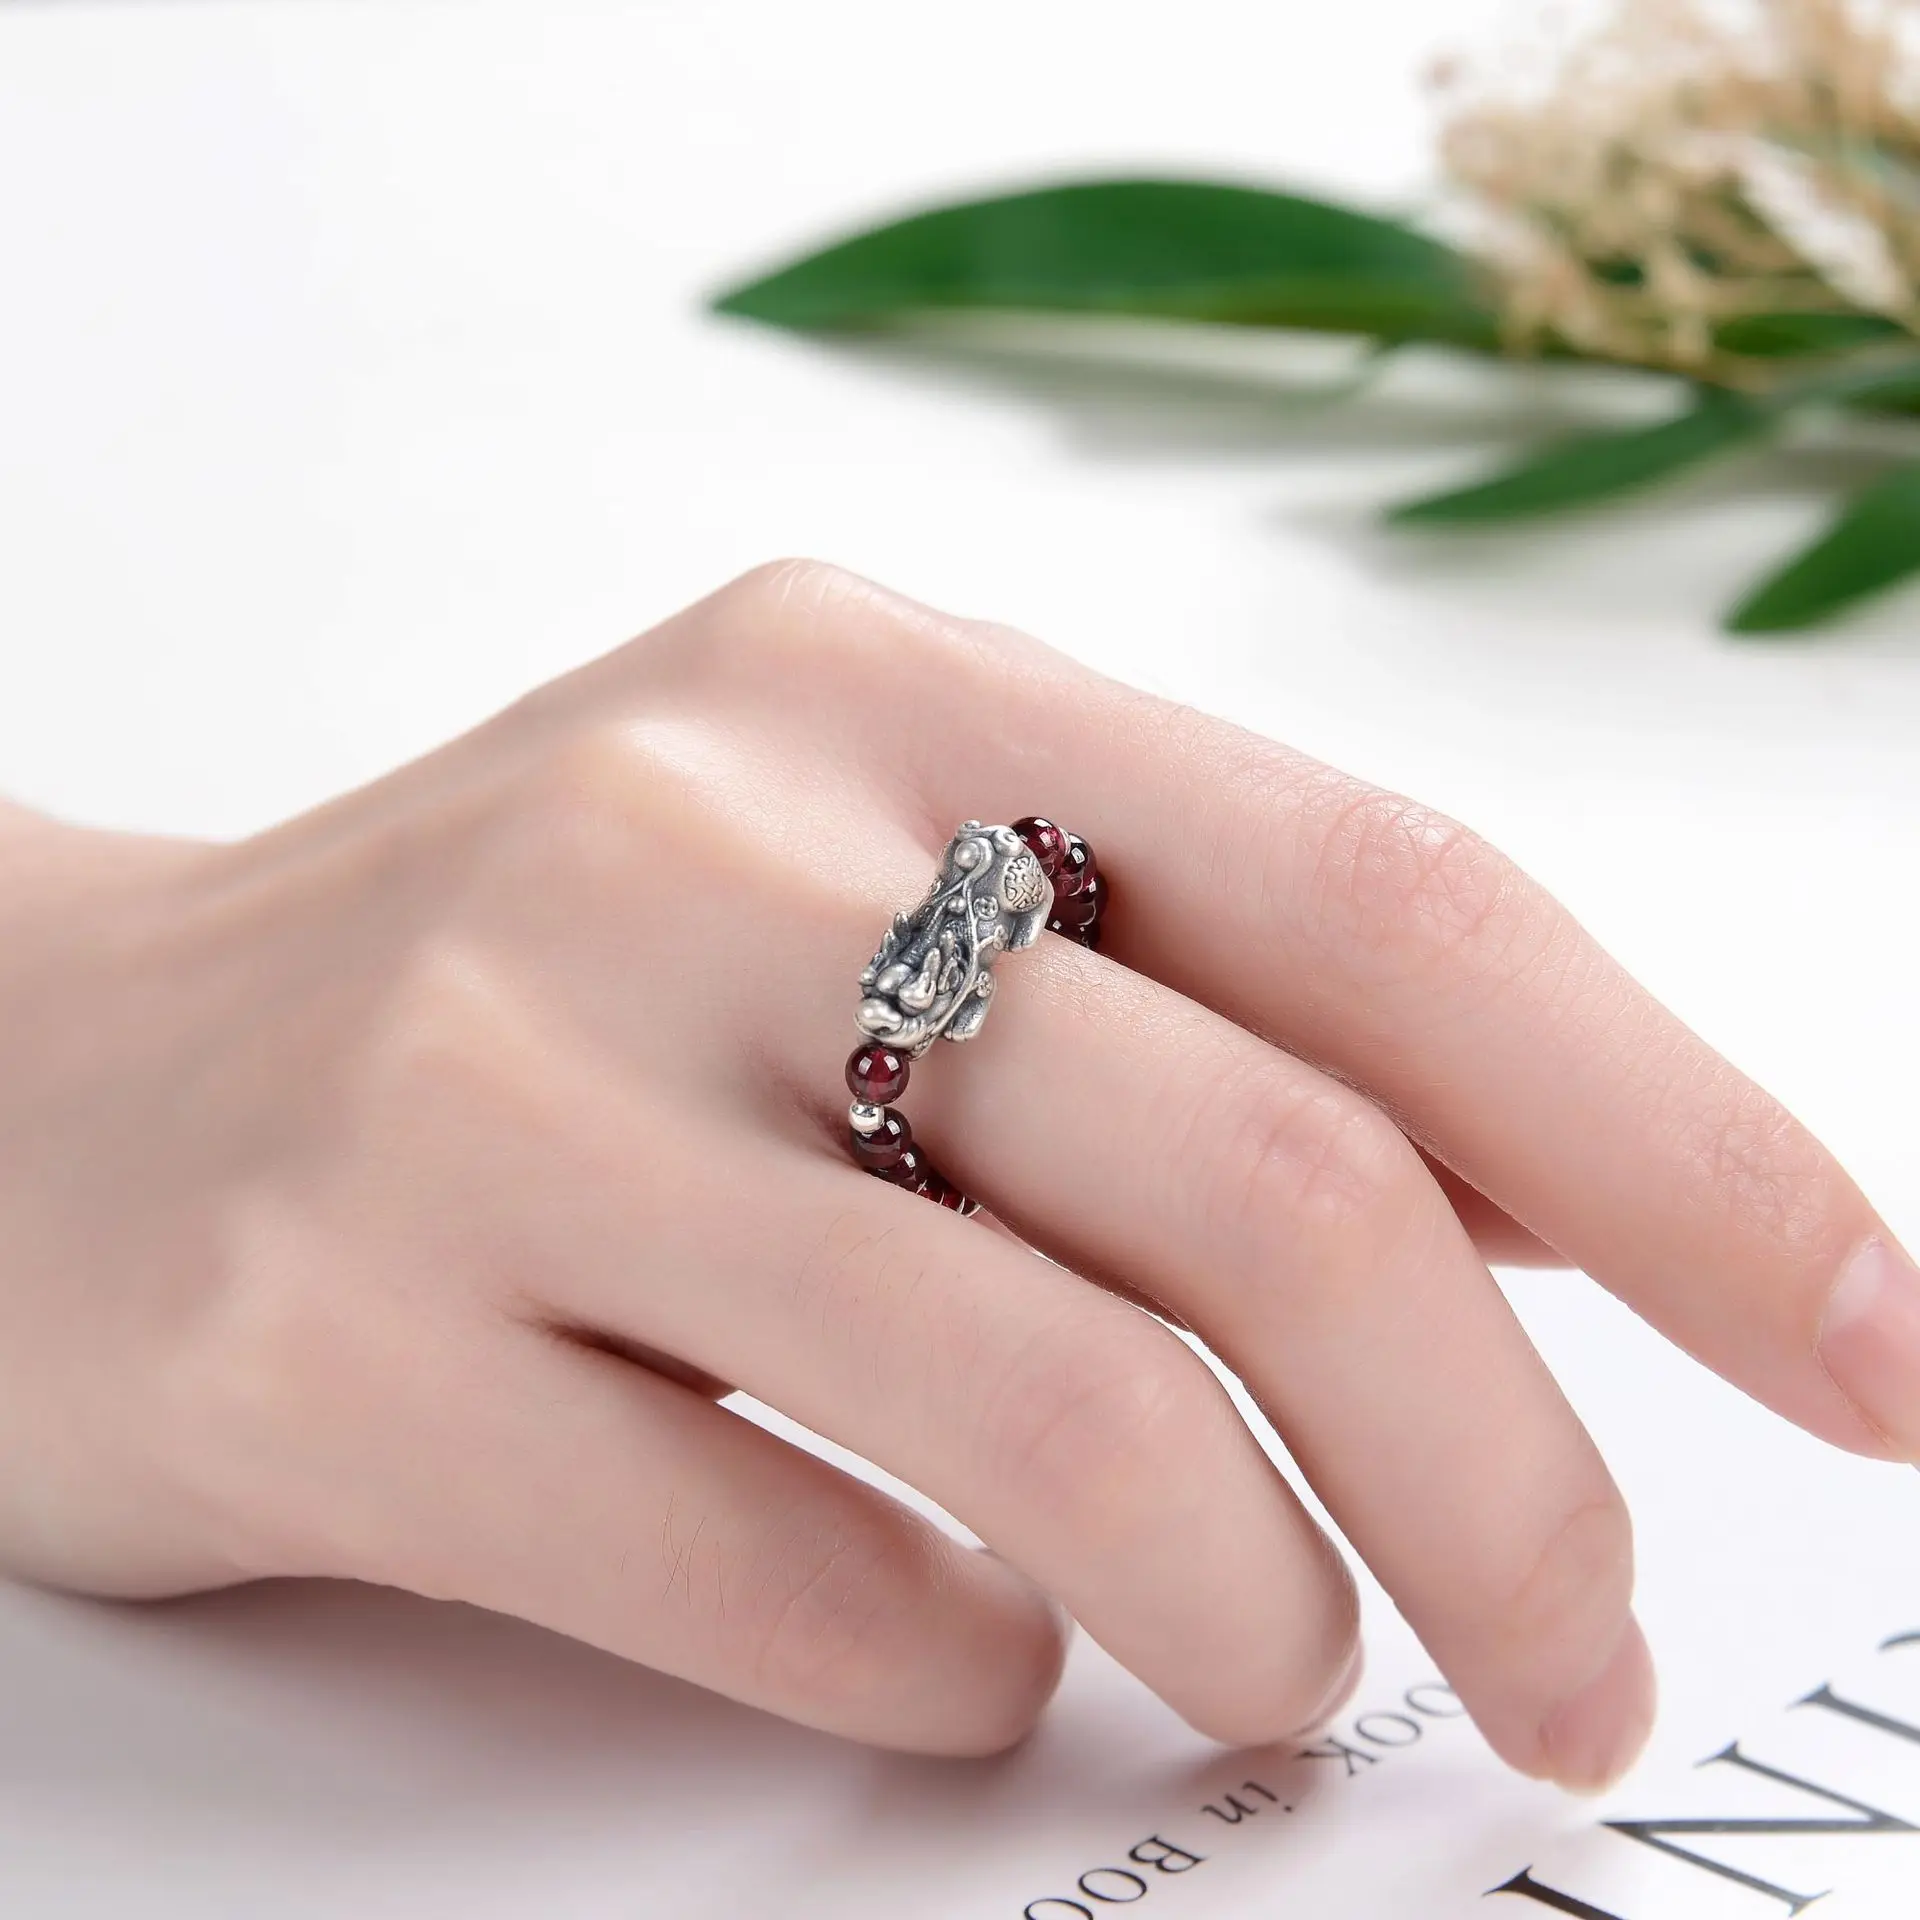 

925 Silver pixiu natural stone bead ring for men women Vintage Crystal Moonstone Agate Garnet Ring lucky couple jewelry gift